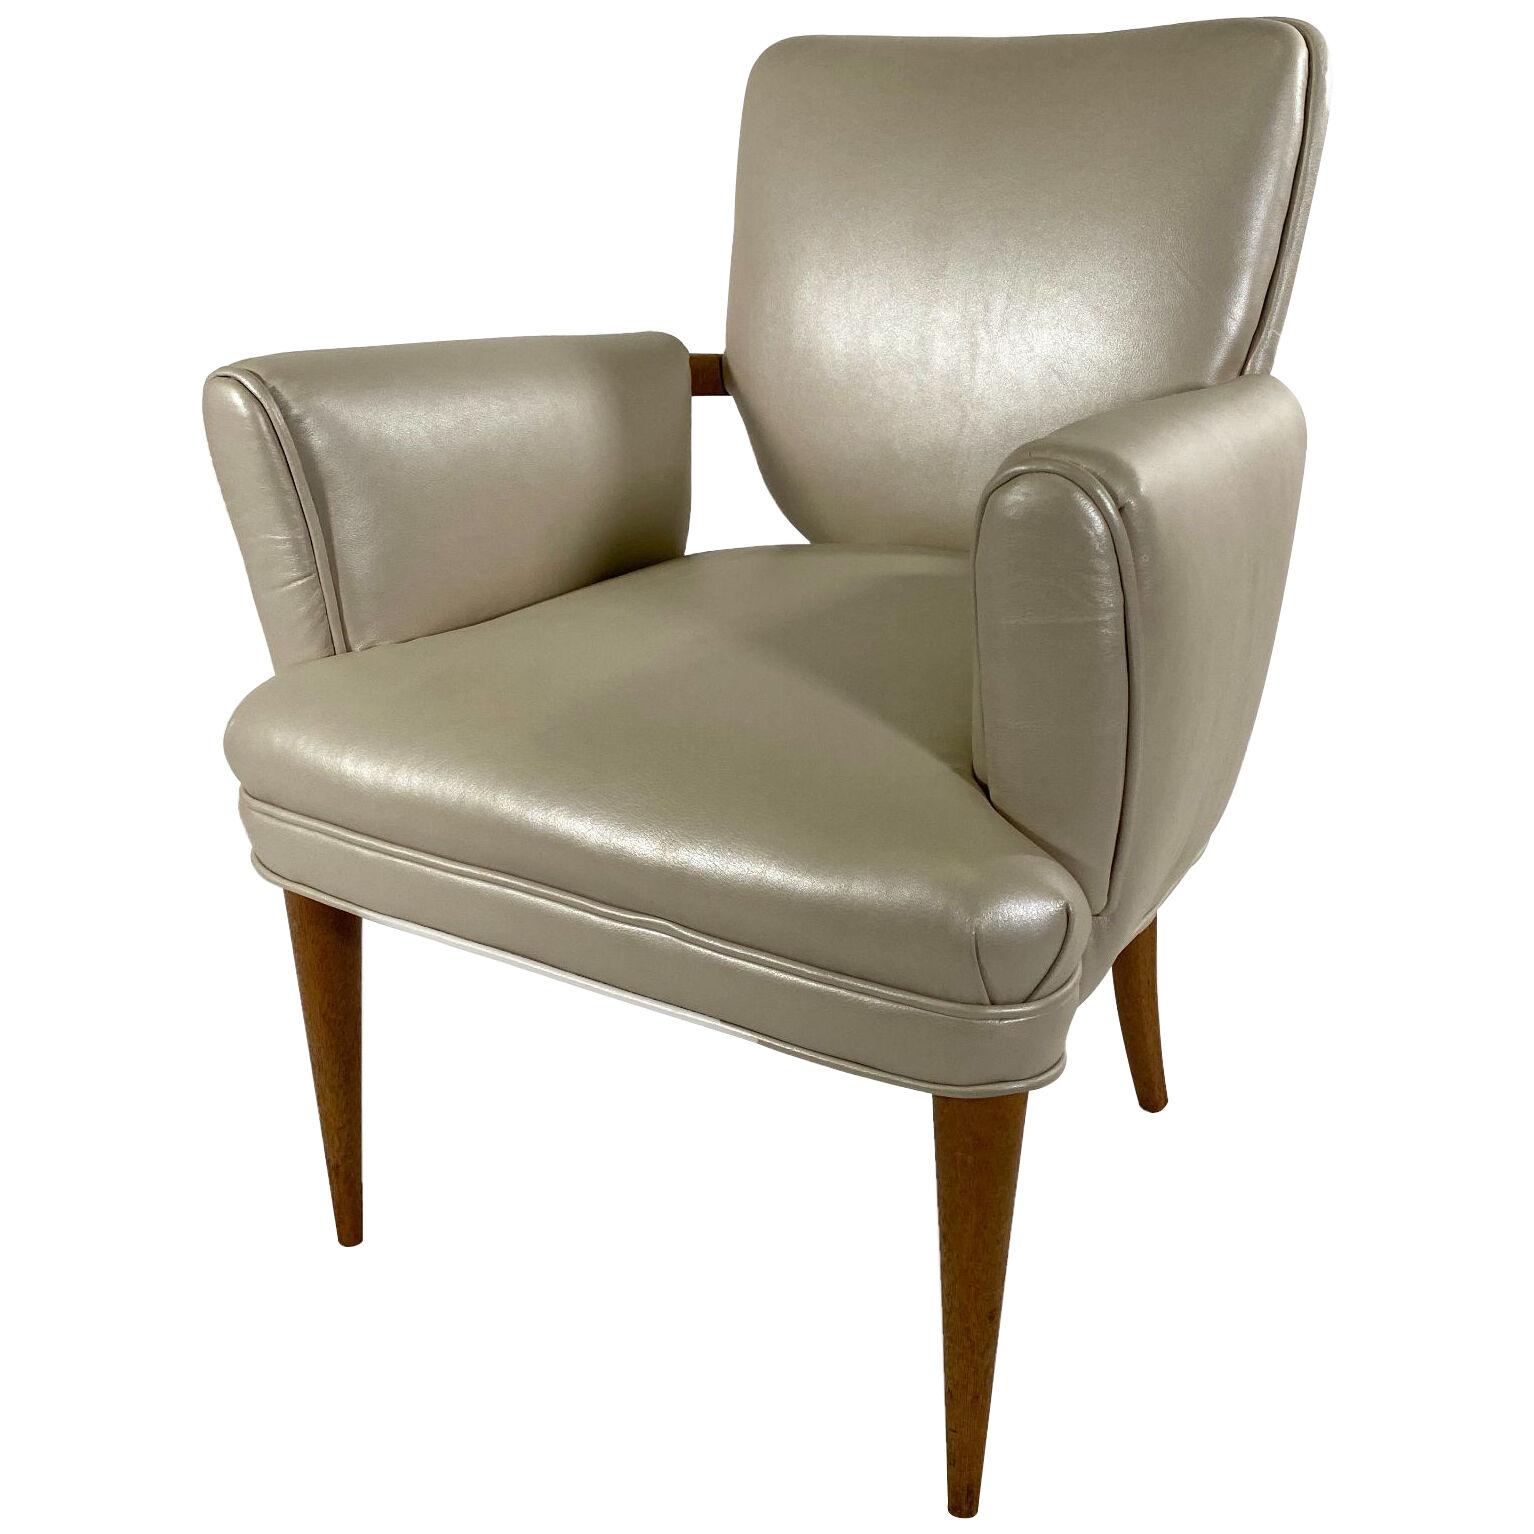 American Modern Bleached Mahogany and Leather Armchair, Paul Frankl